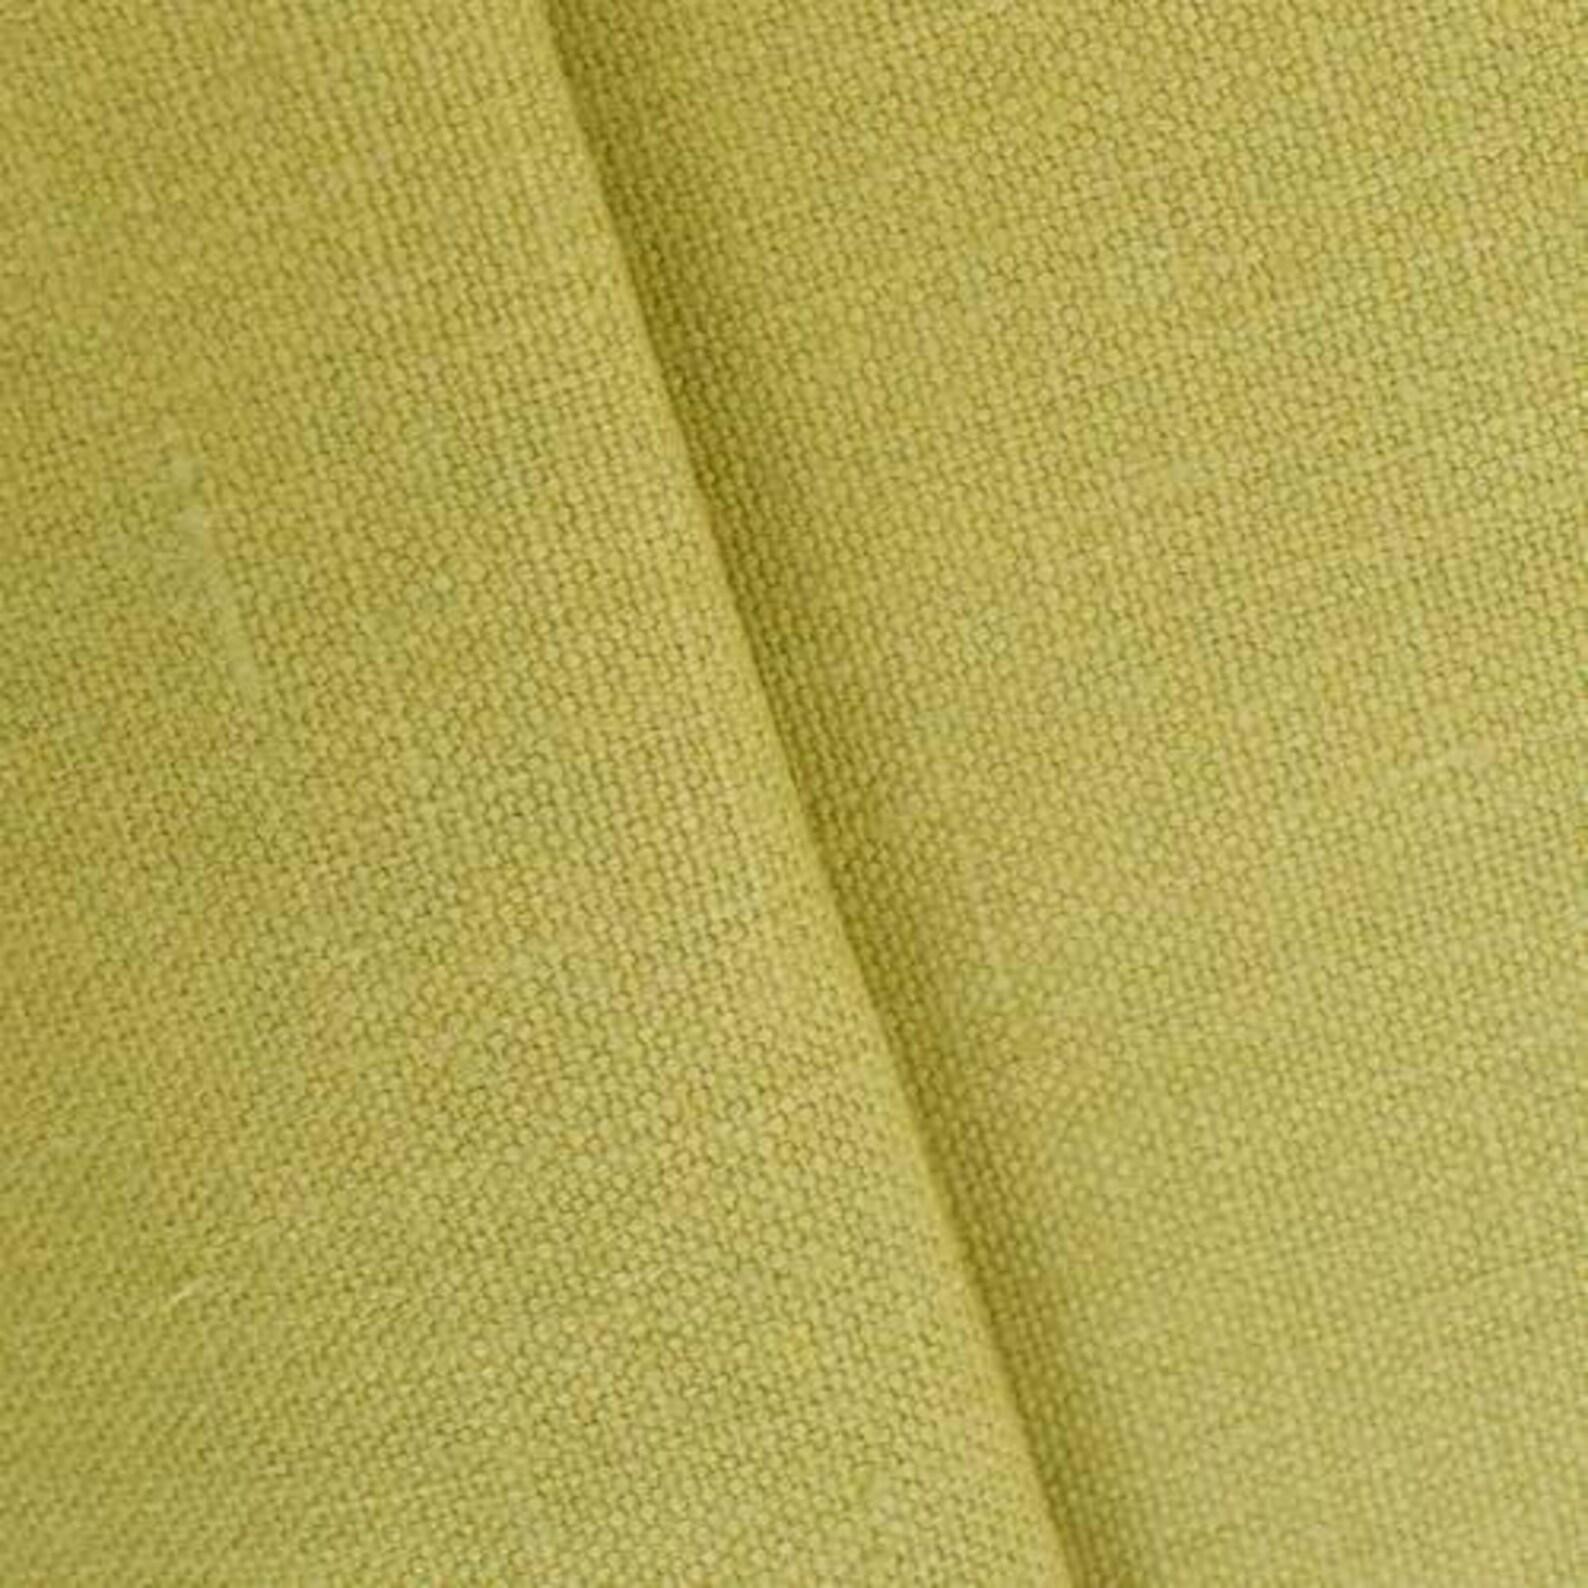 Antique Green Linen Canvas Fabric By The Yard | Etsy